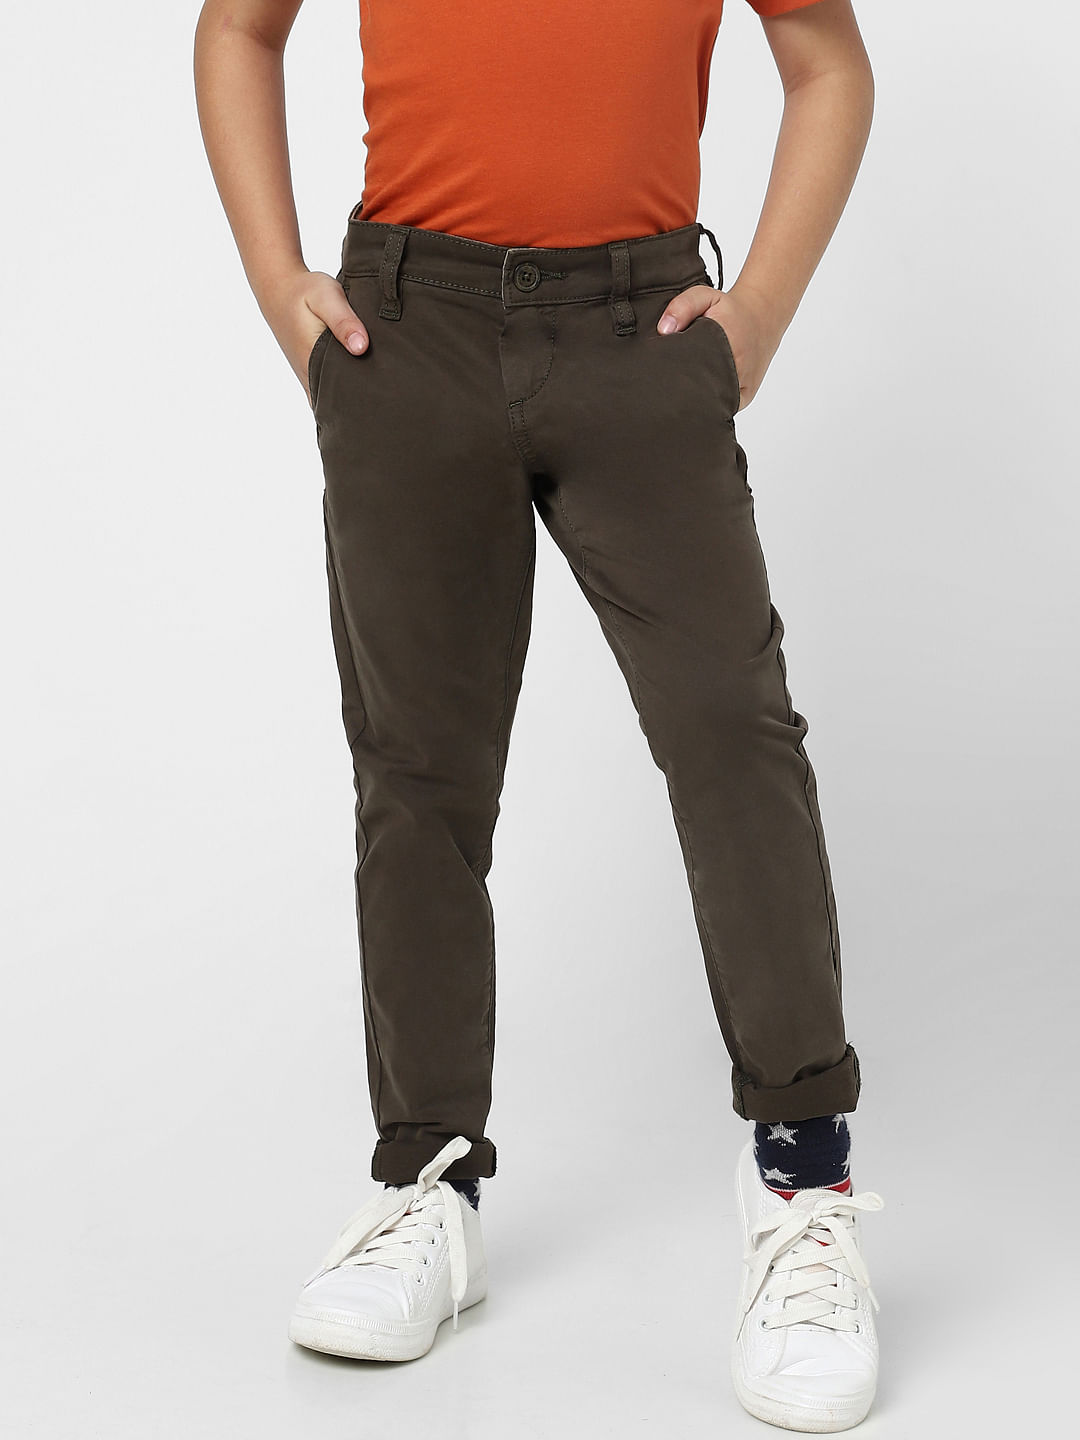 Boys Trousers  Buy Boys Chinos  Trousers Online in India  NNNOW